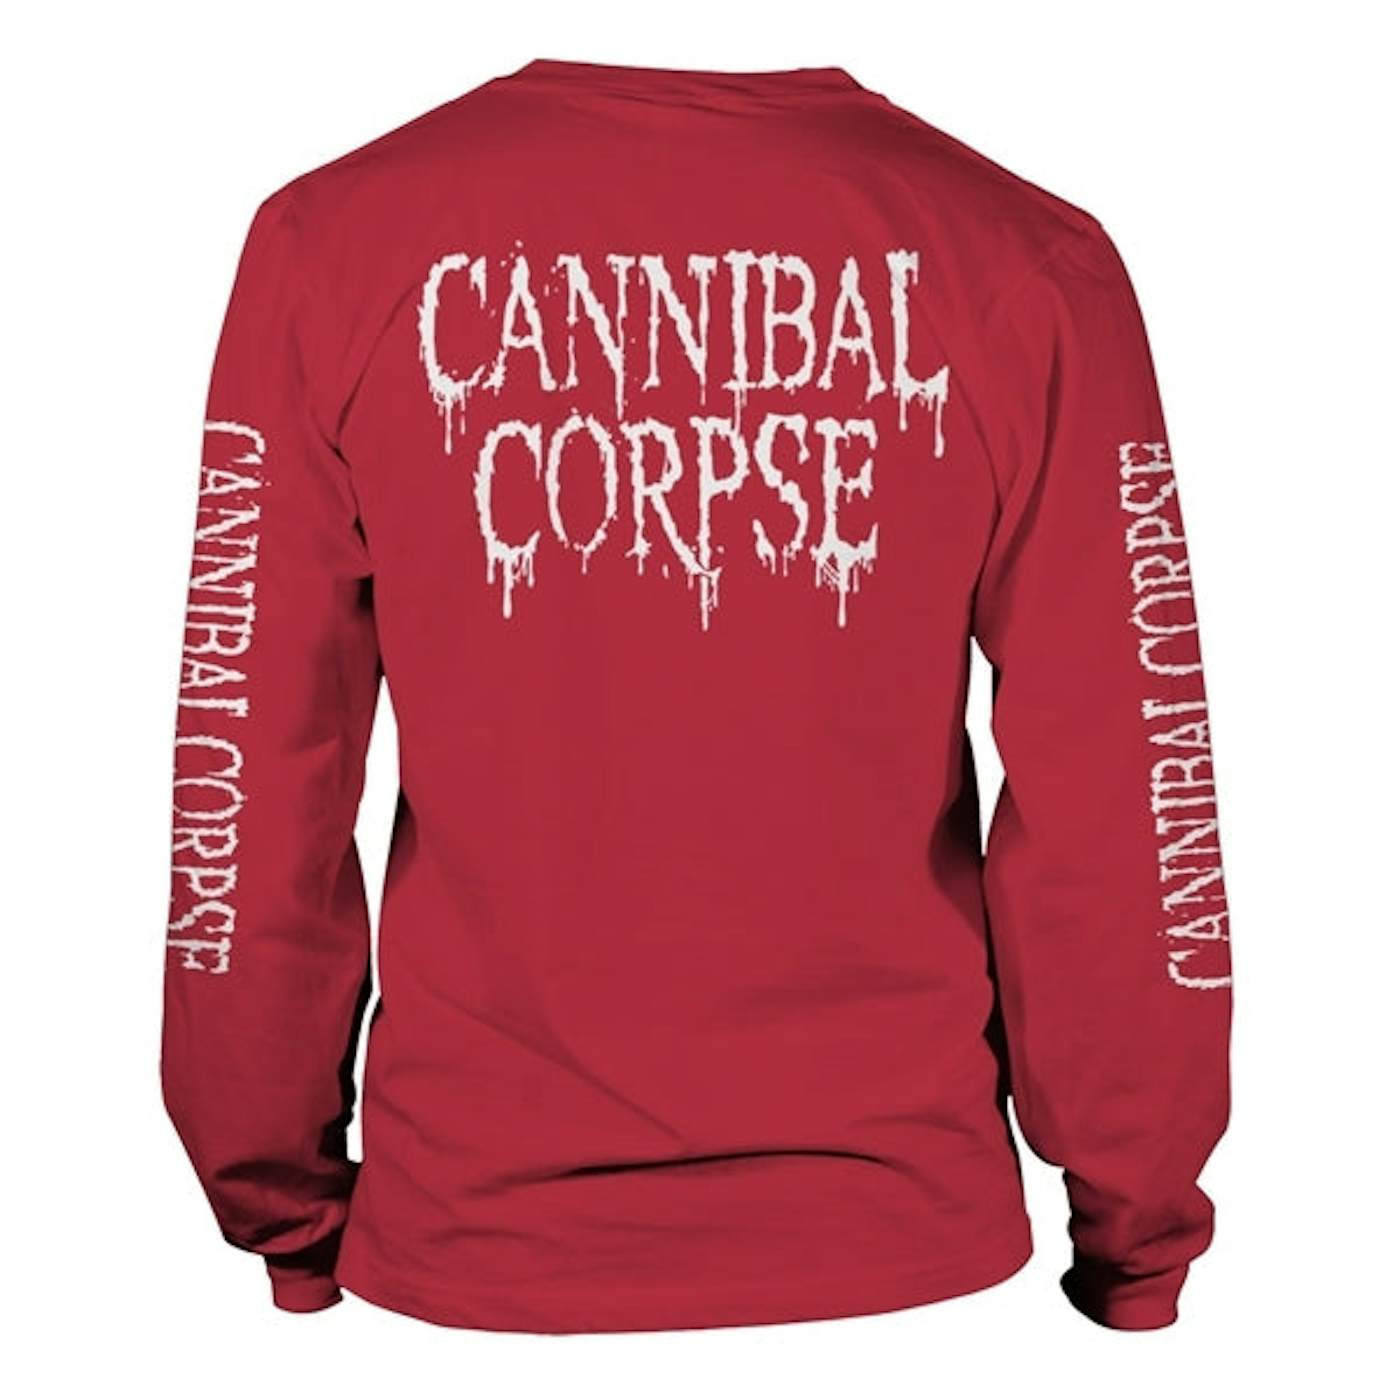 Cannibal Corpse Long Sleeve T Shirt - Pile Of Skulls 2018 (Red)